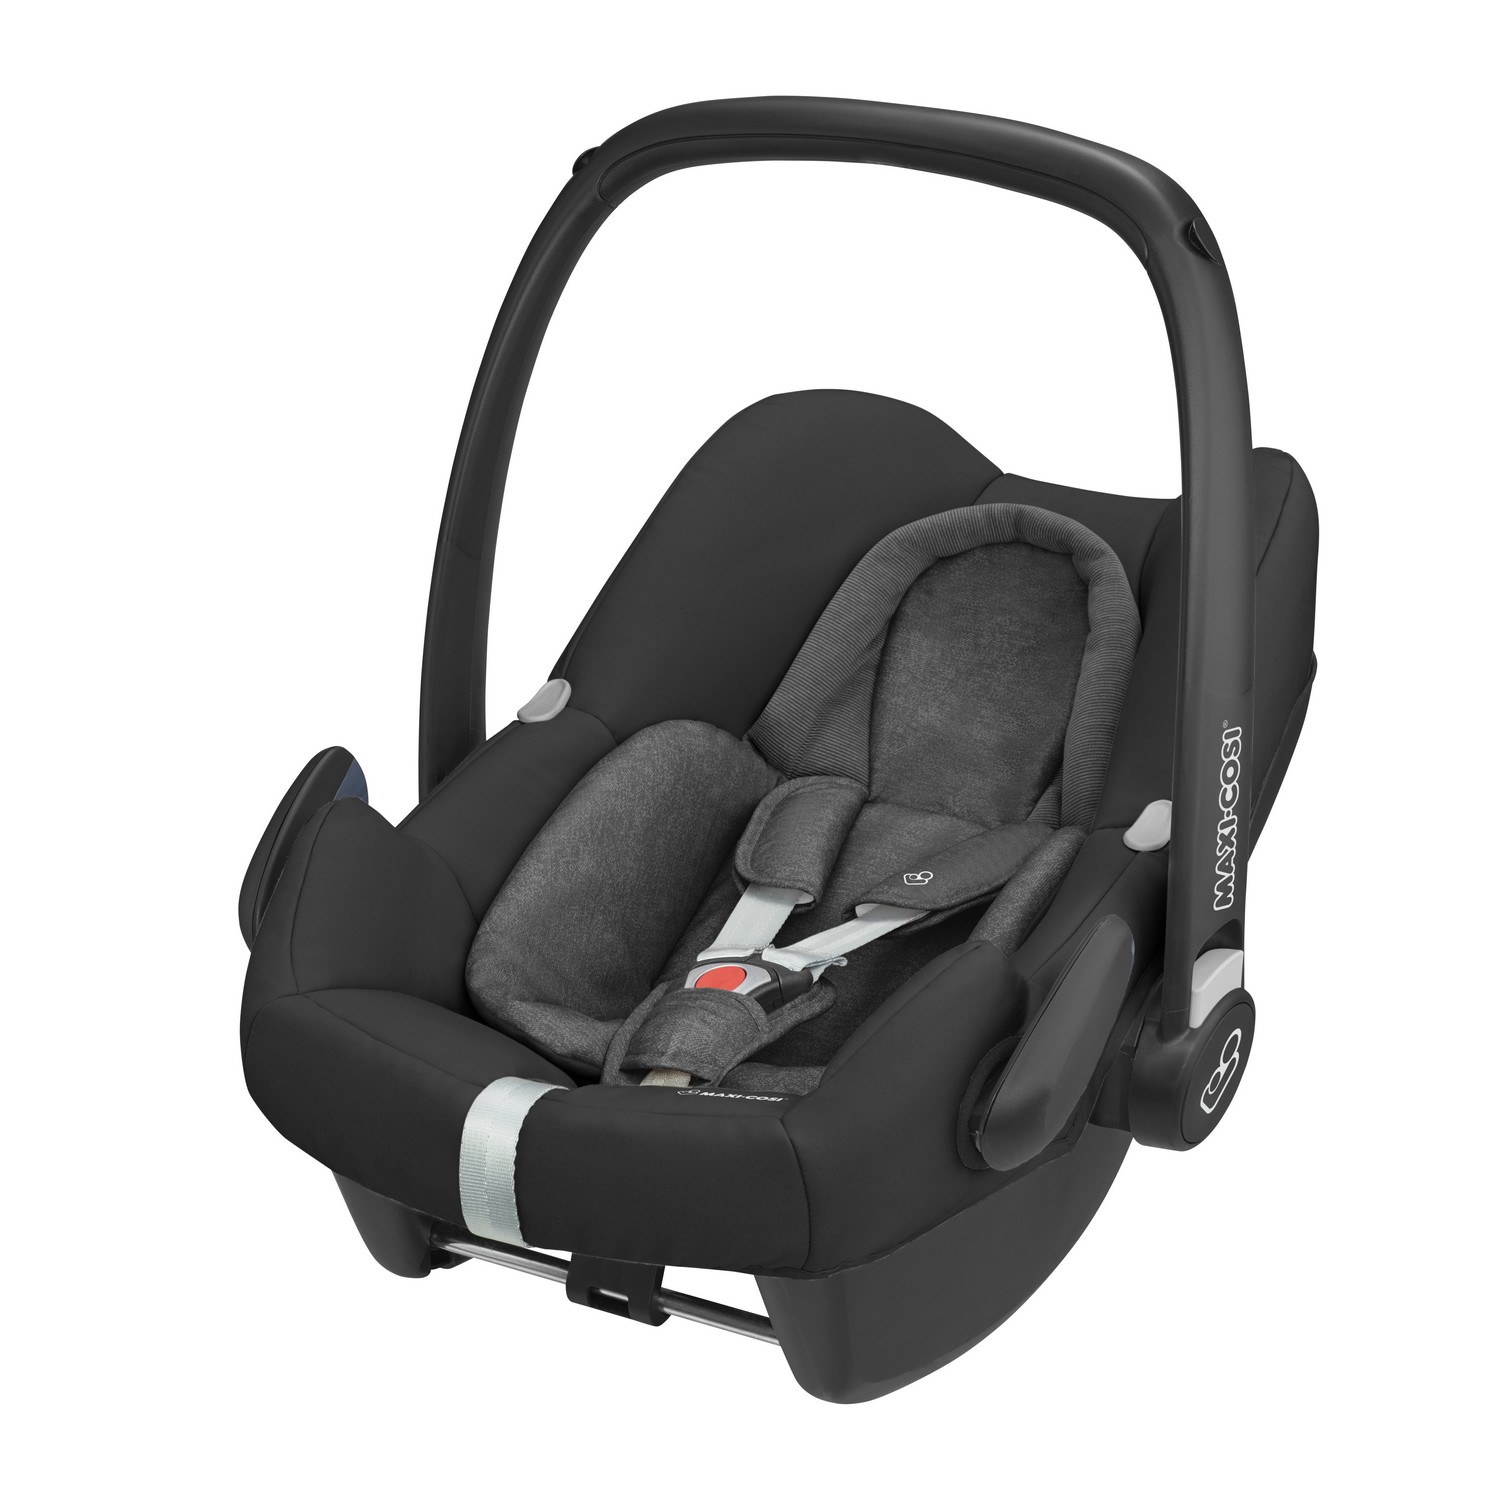 what car seats fit maxi cosi isofix base